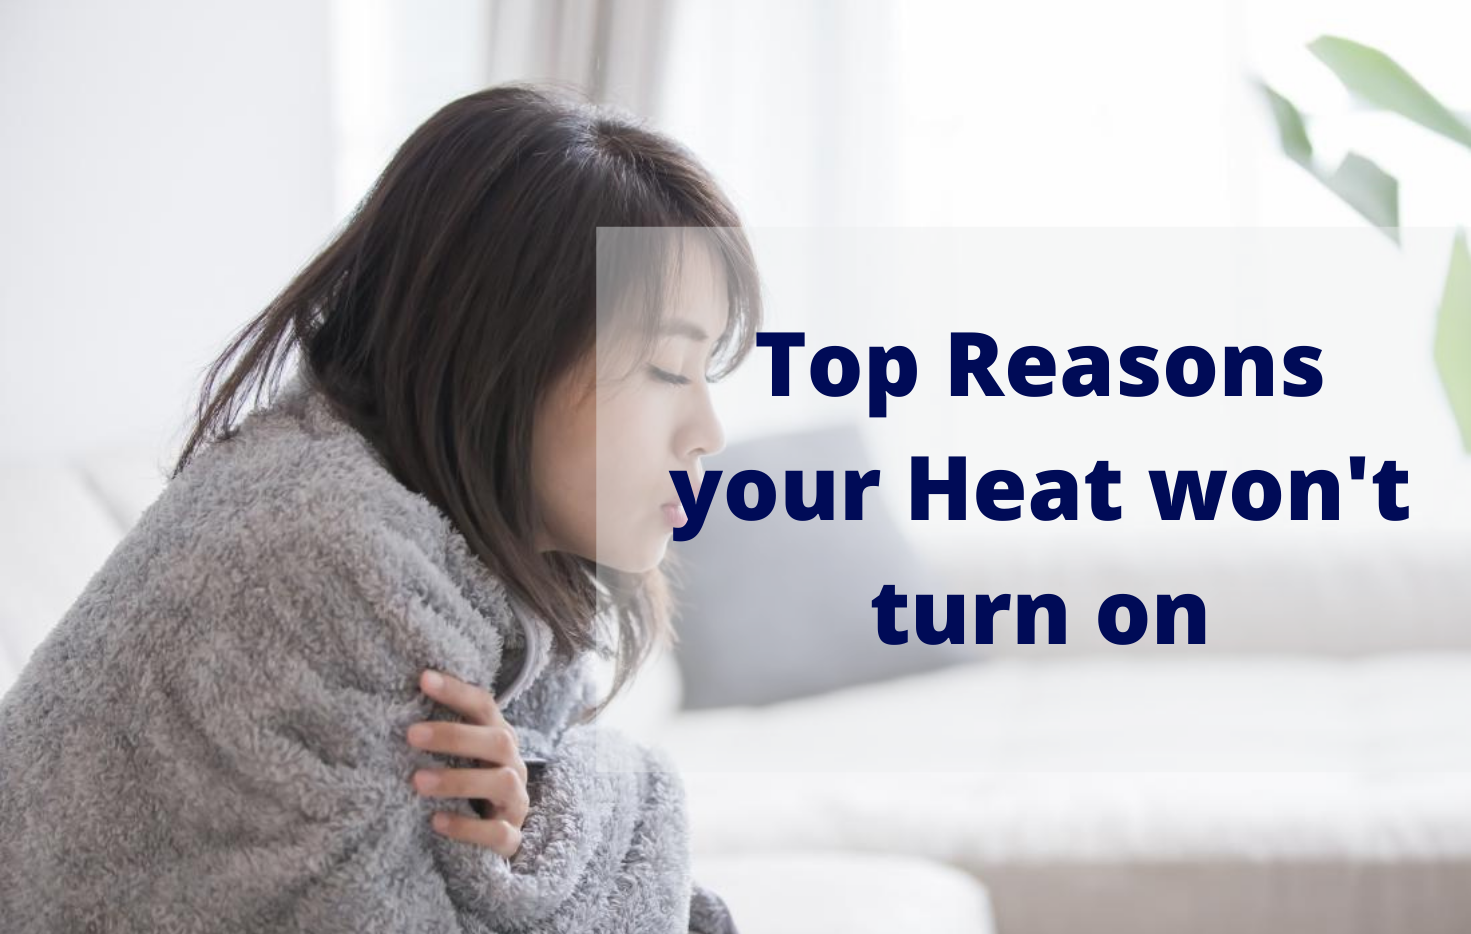 Top reasons your Heat won't turn on featured image